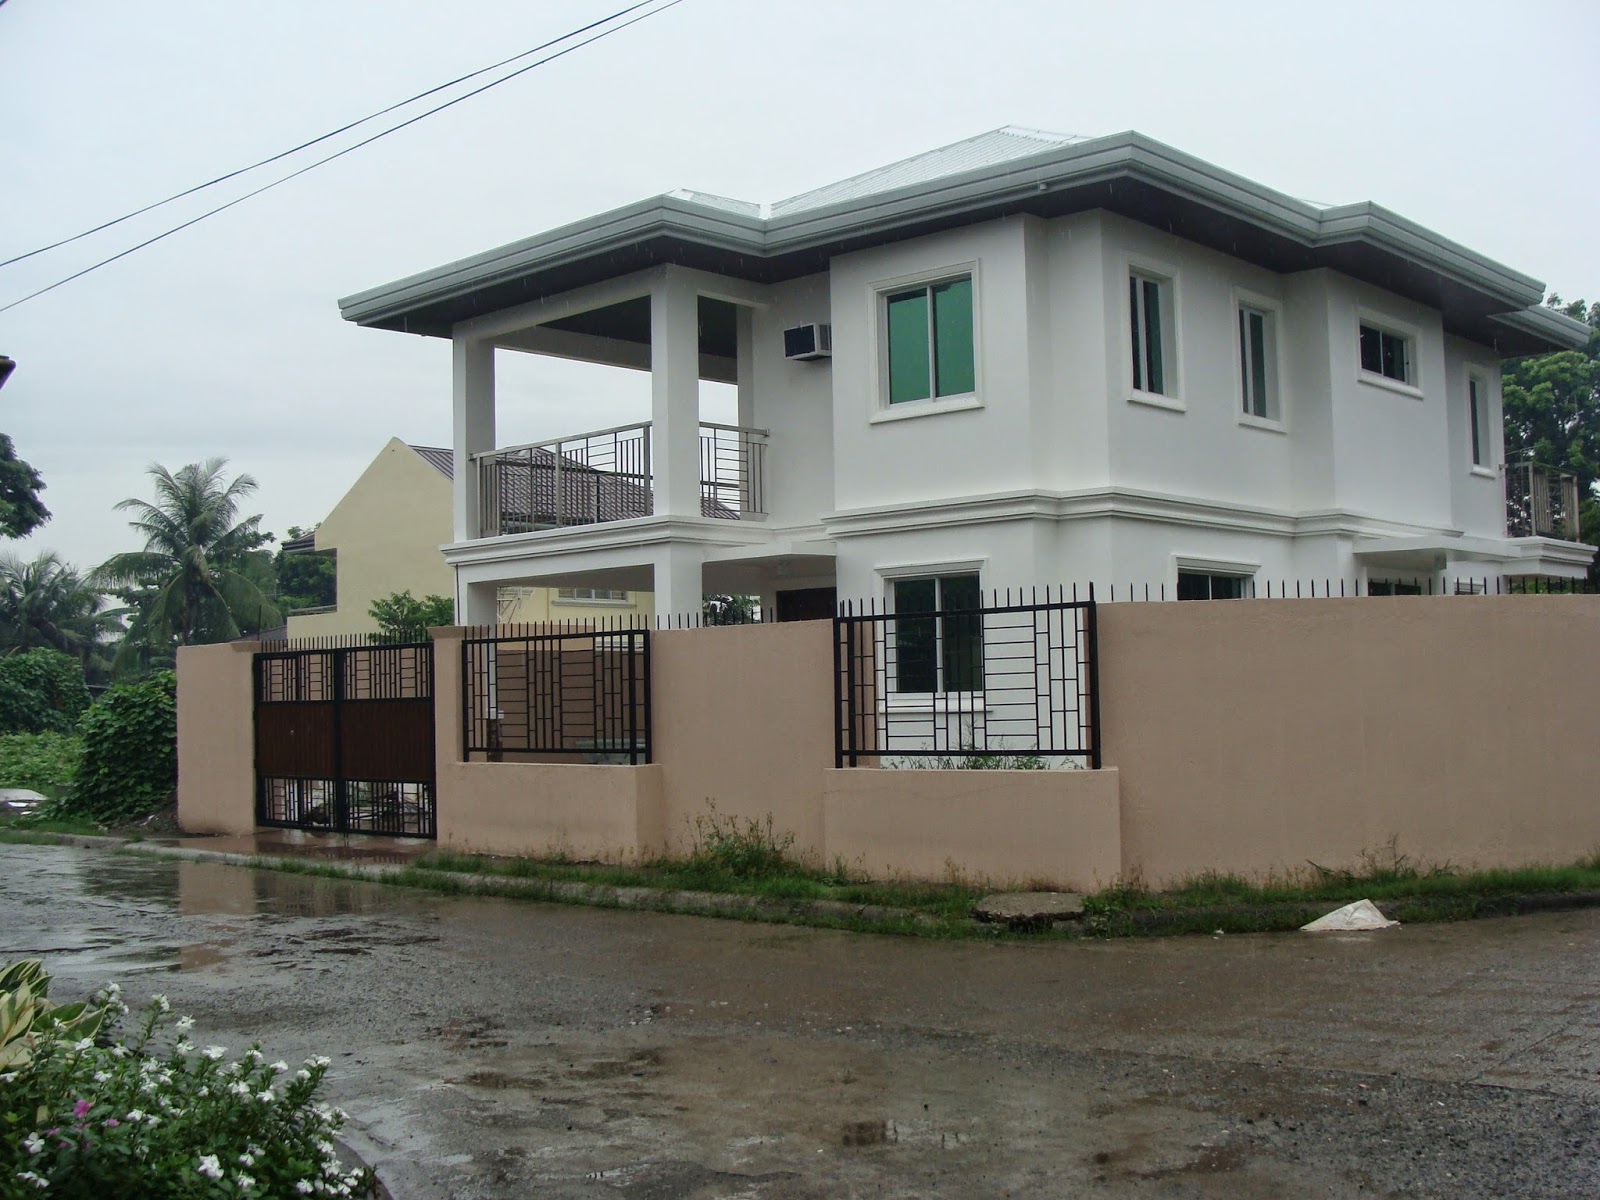 Structural Design Of Two Storey Residential House Philippines - Front